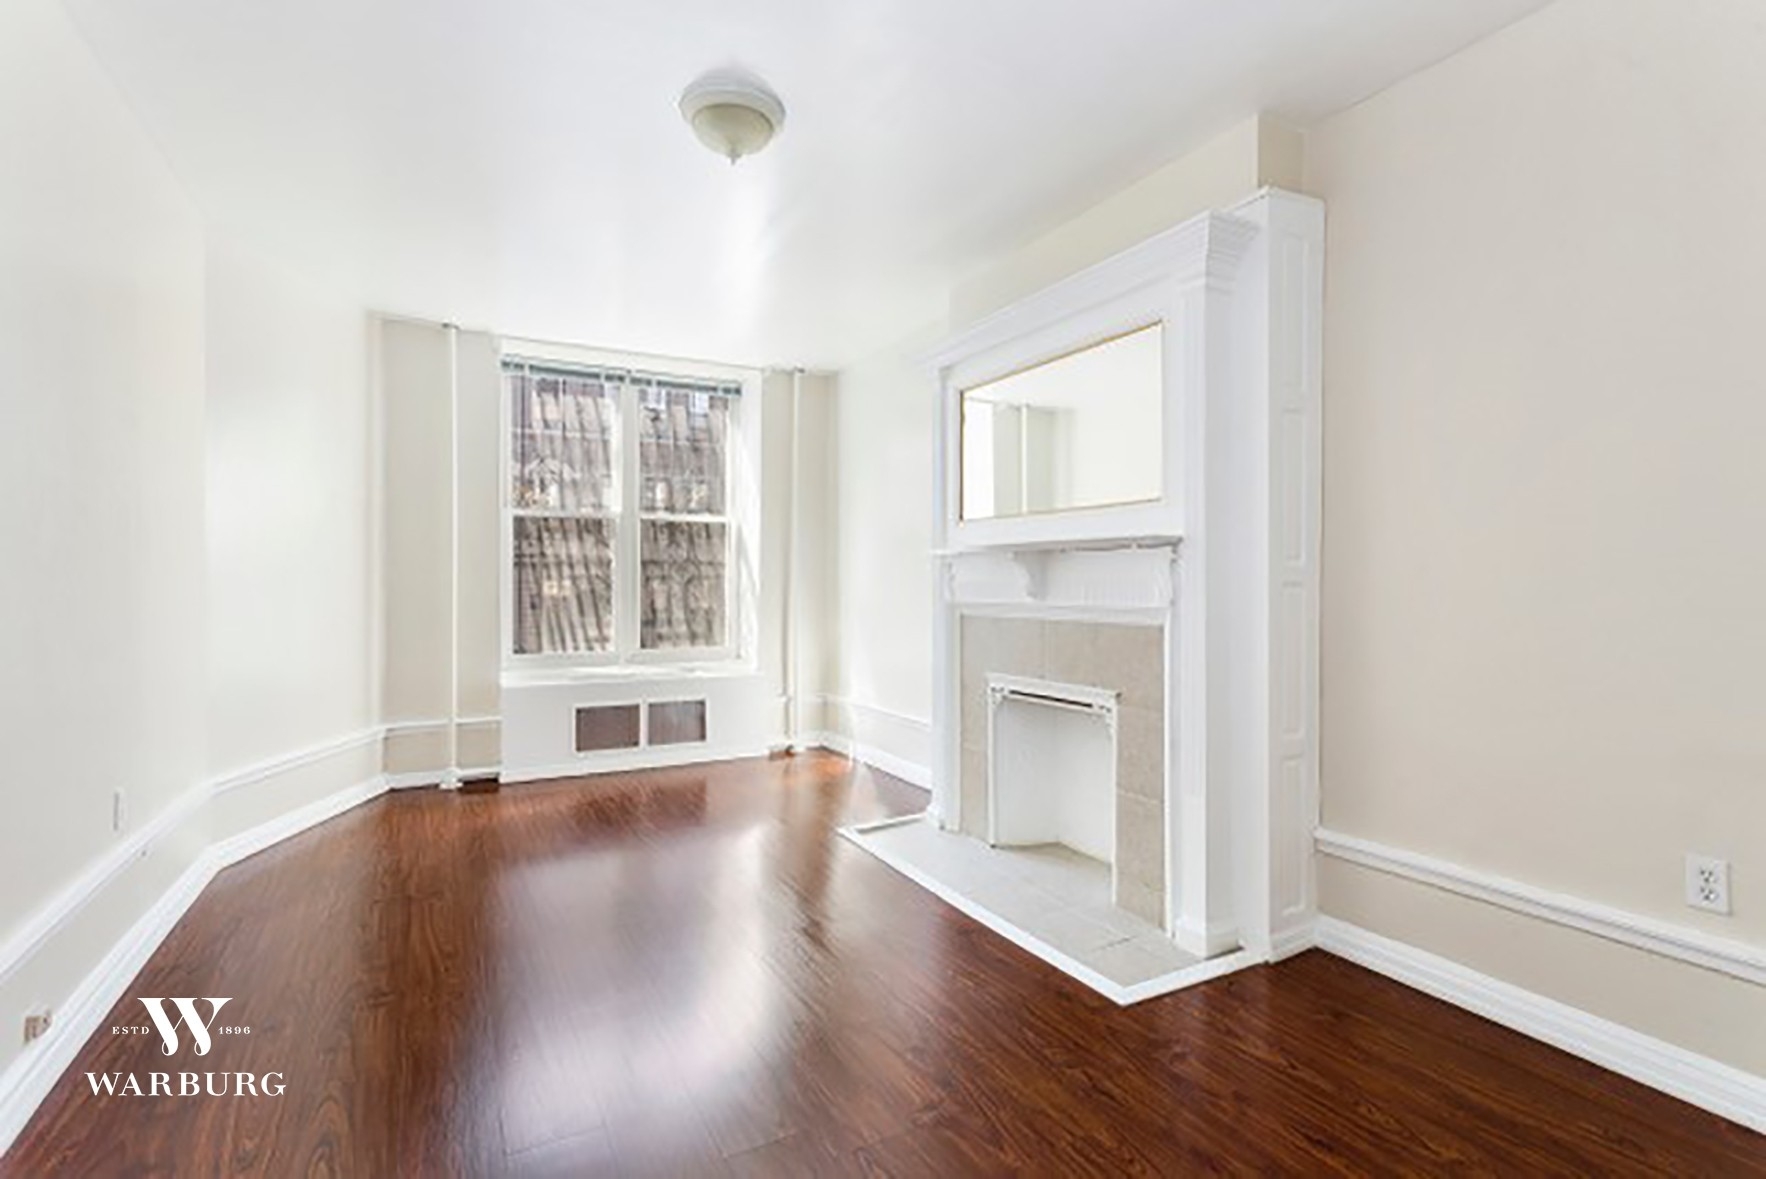 Property at 511 W 142ND ST, 2 New York